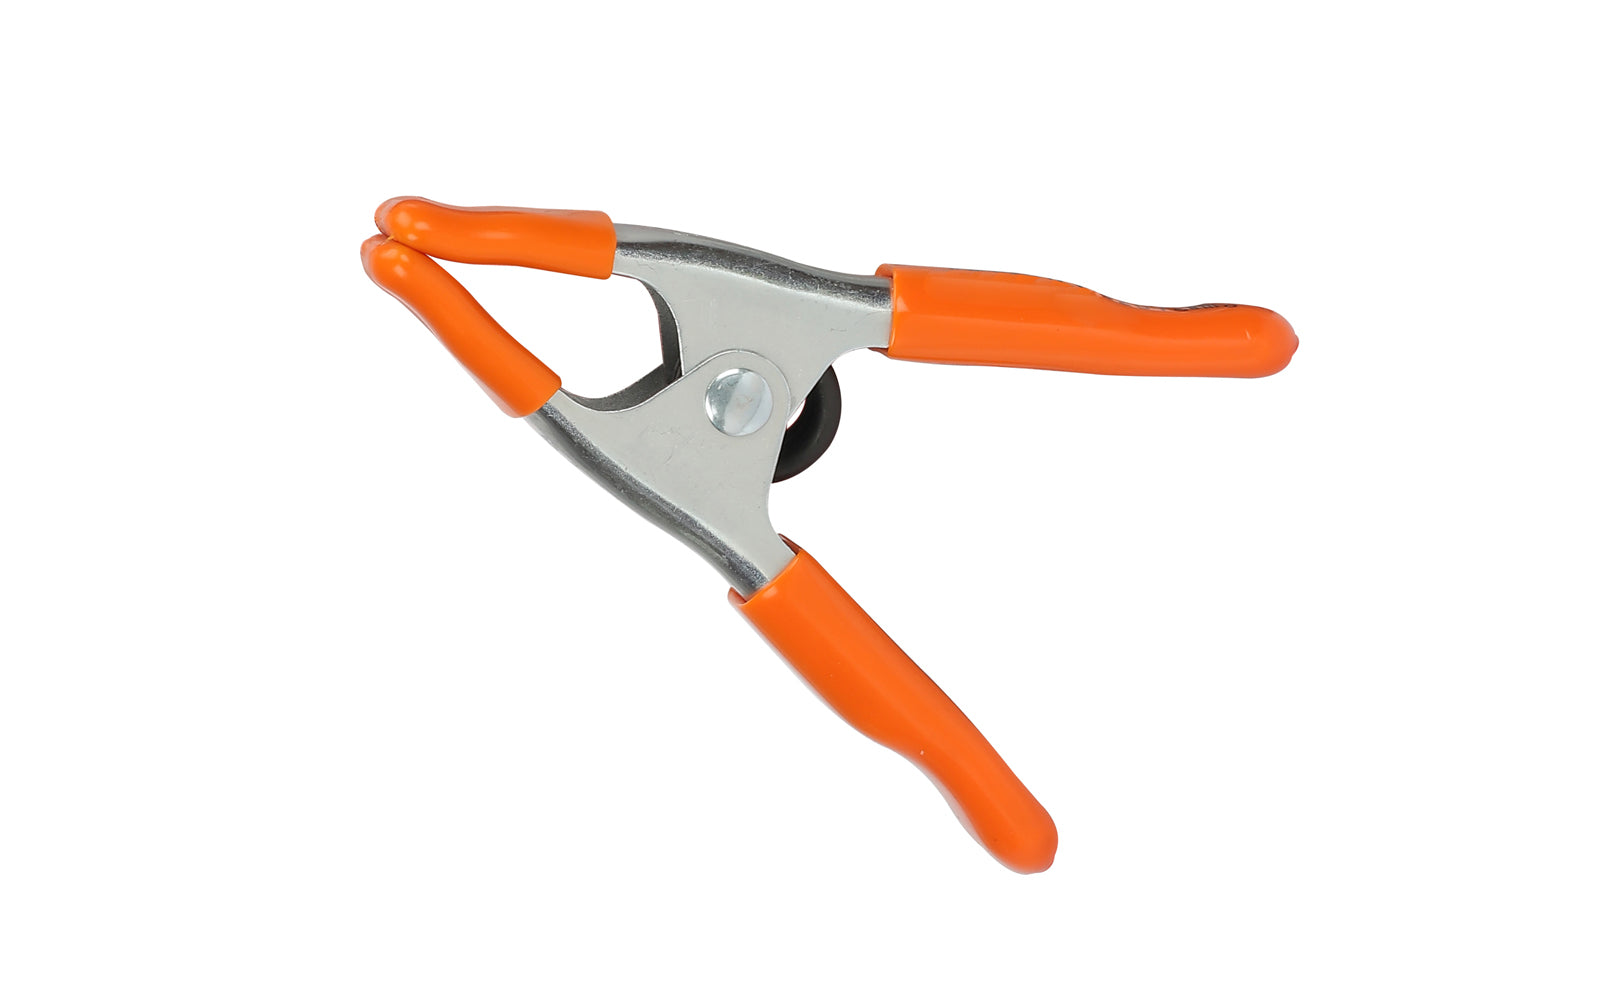 Pony 1" Opening Classic Spring Clamp ~ No. 3201-HT - With protected poly-vinyl handles & tips - Pony / Jorgensen - poly-vinyl protected handles & jaw tips mean you can use them on metal, wood, plastic, fabric - 1" max opening - Steel Spring Clamp ~ 044295320160